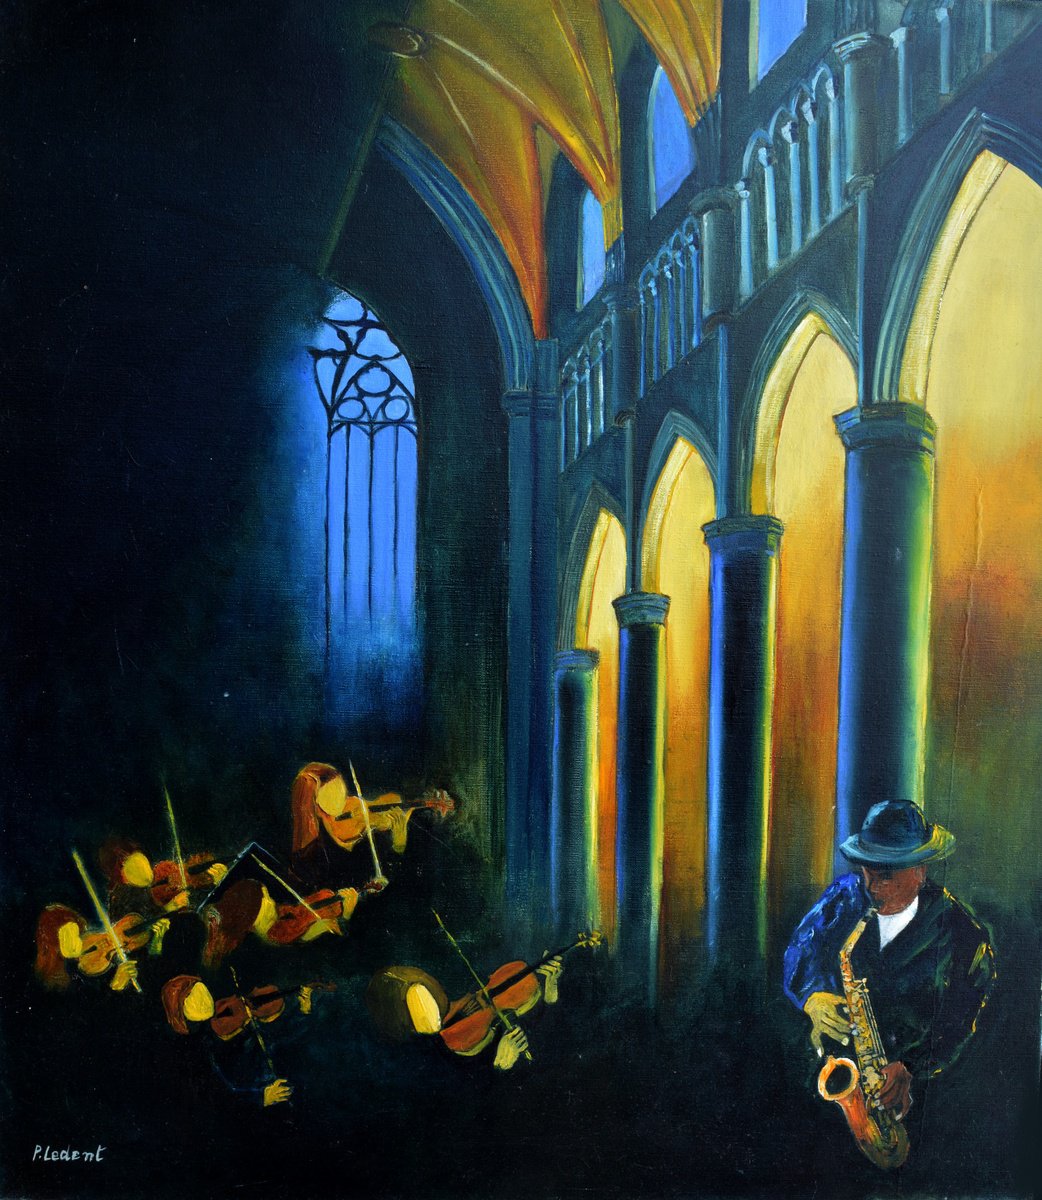 Sax Concerto In A Church Oil Painting By Pol Henry Ledent Artfinder